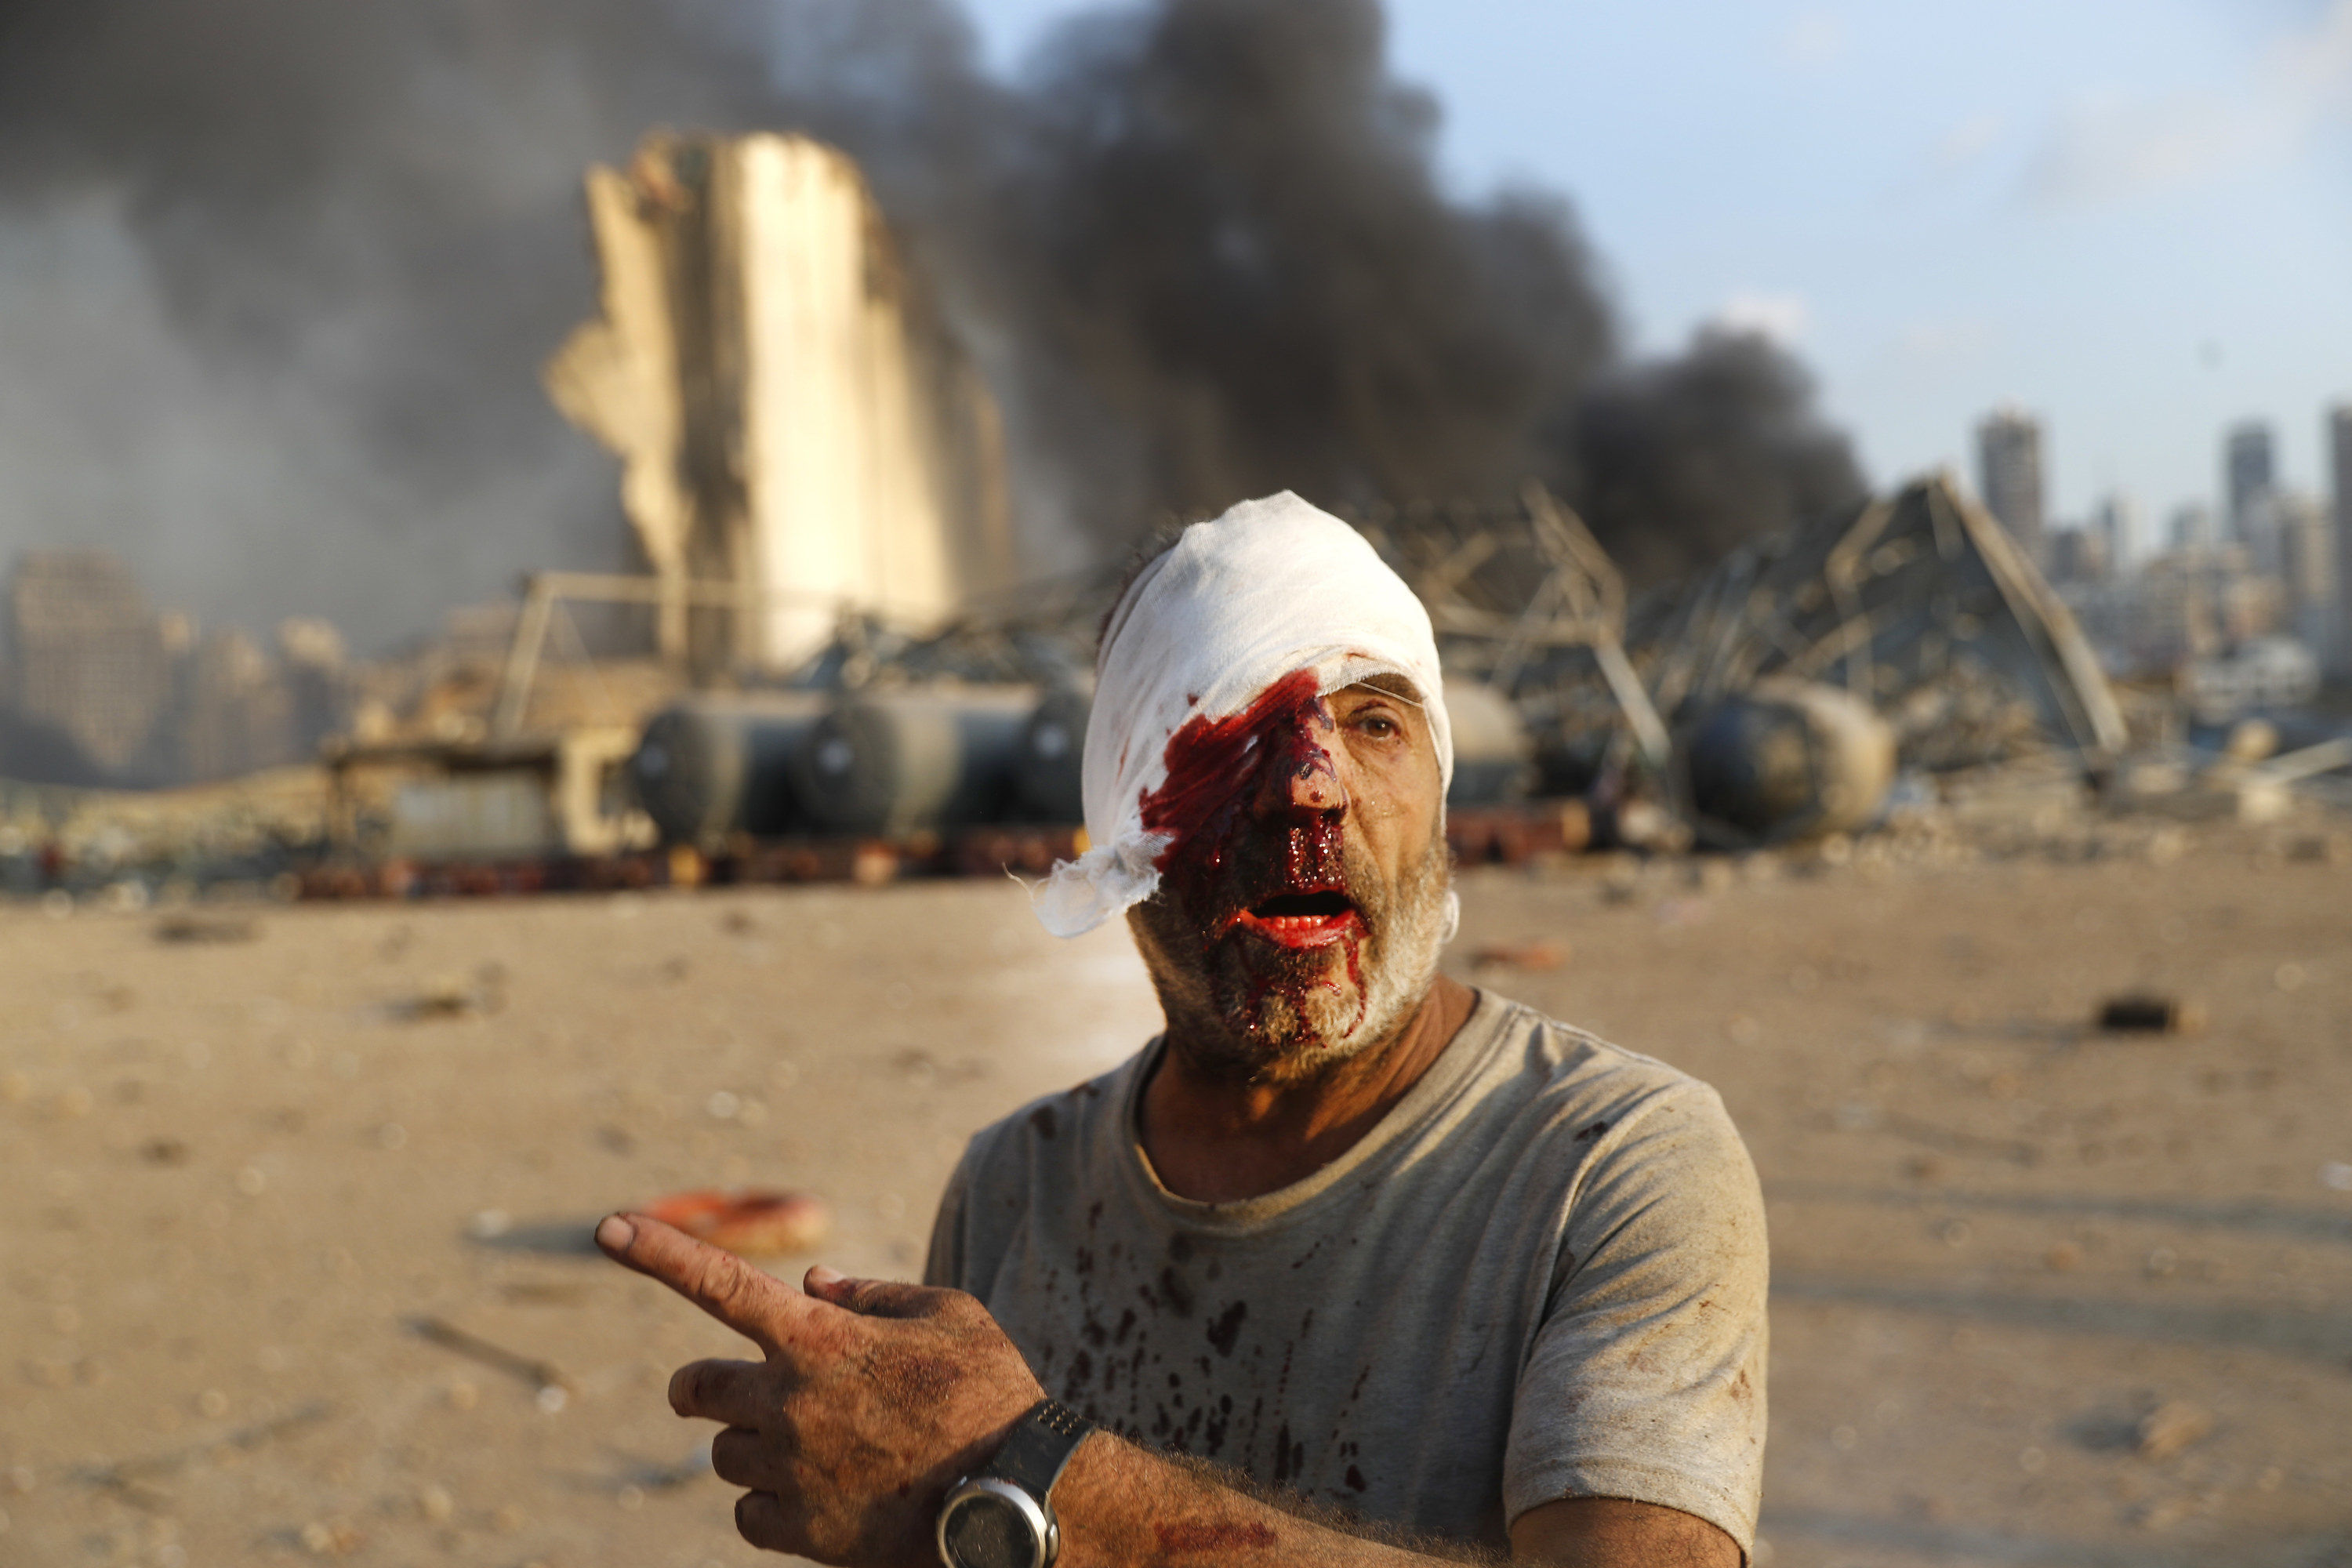 A man with a bandage on his head and blood running down the left side of his face points away while standing in front of debris